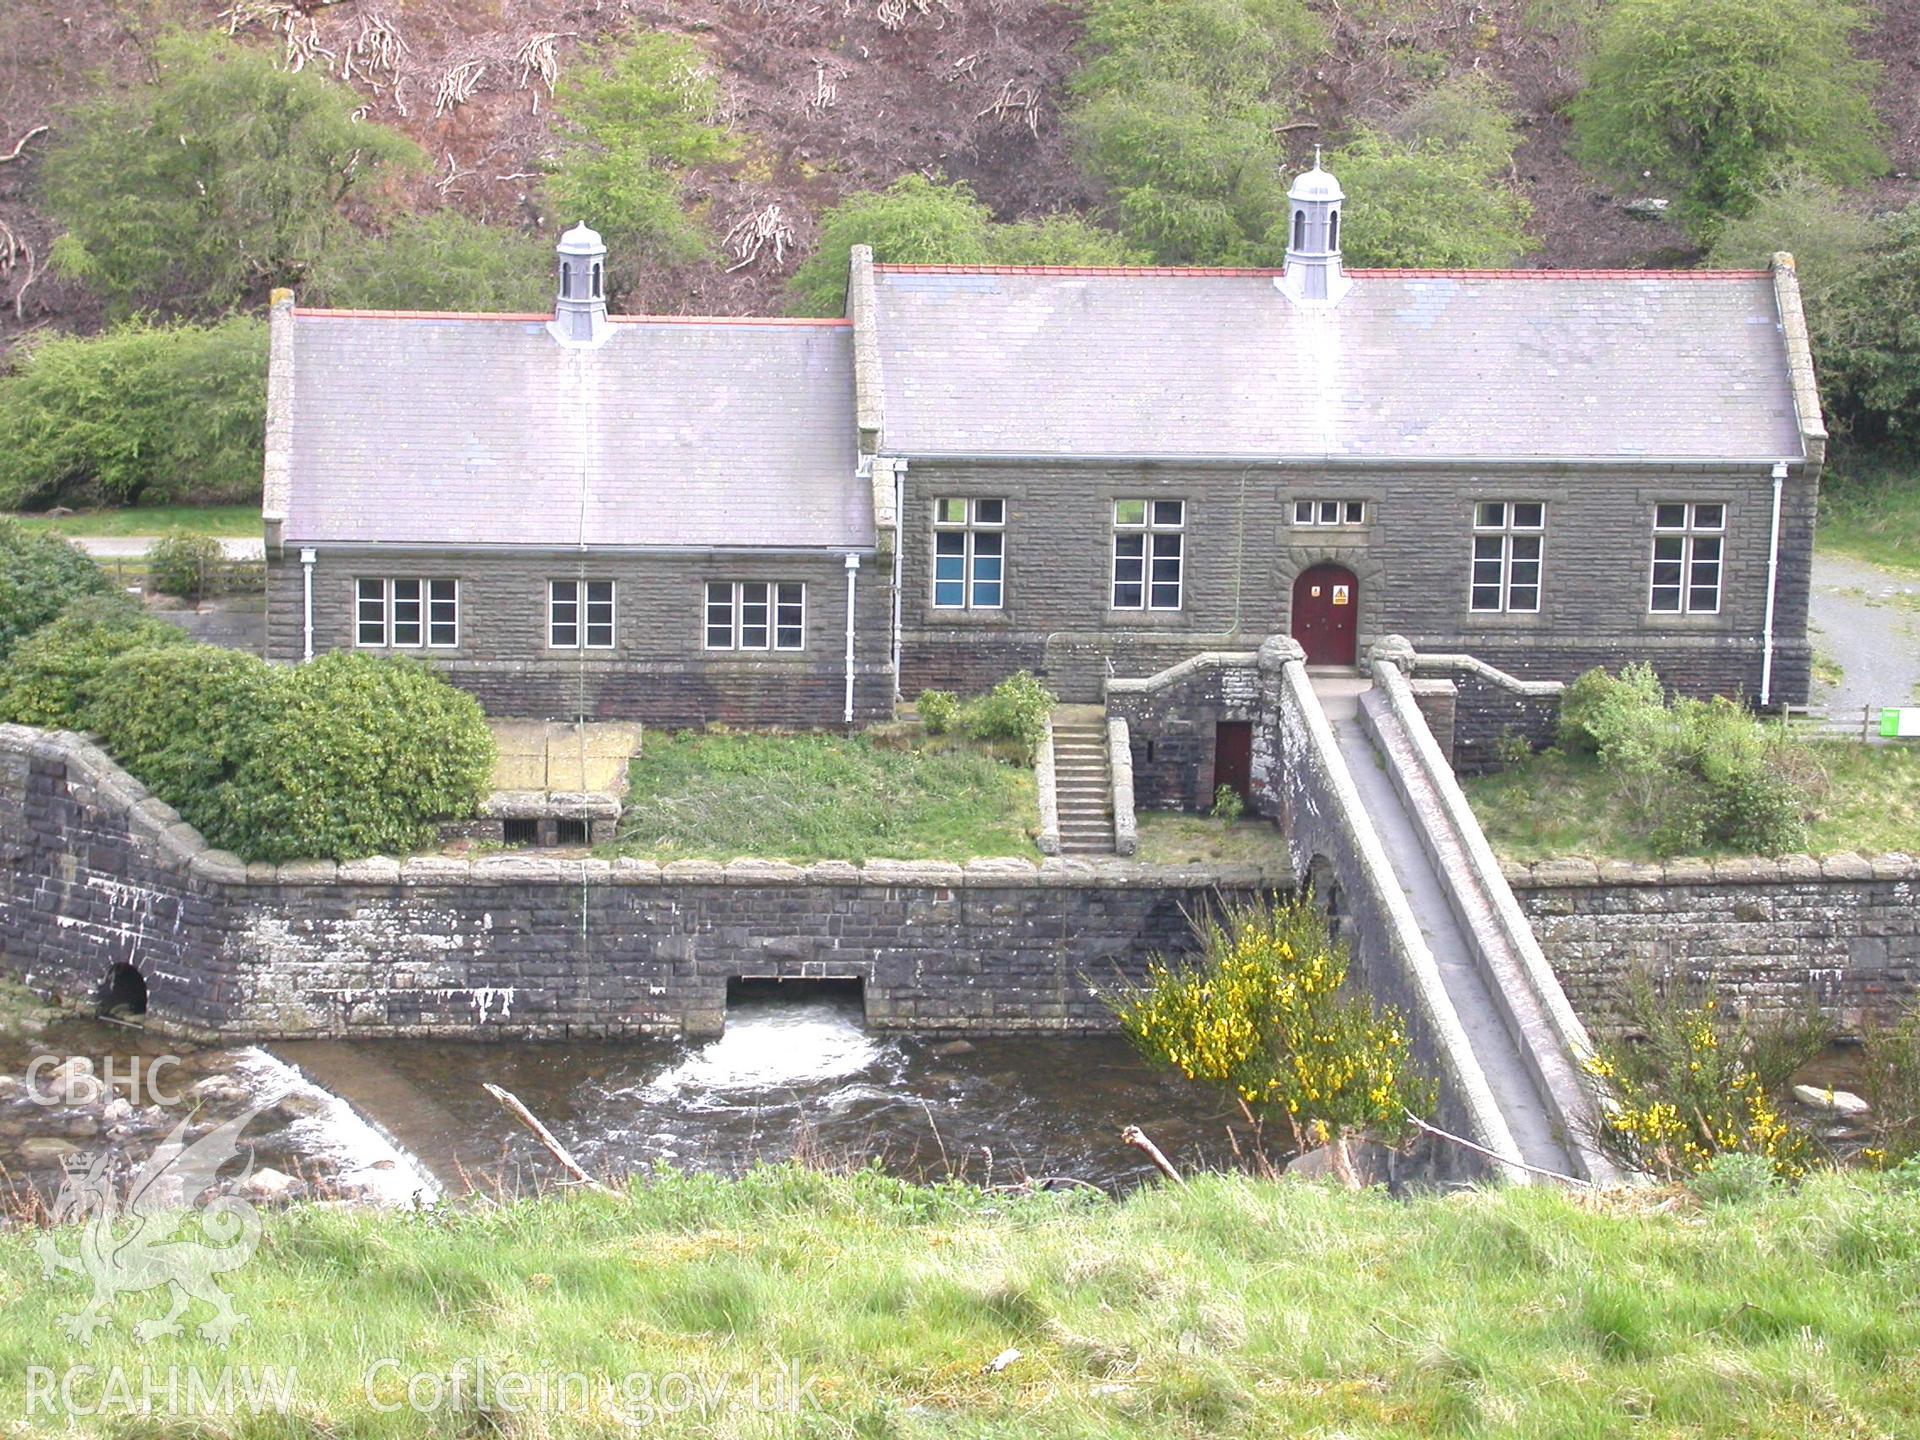 Power station and water outlet from the north-west.